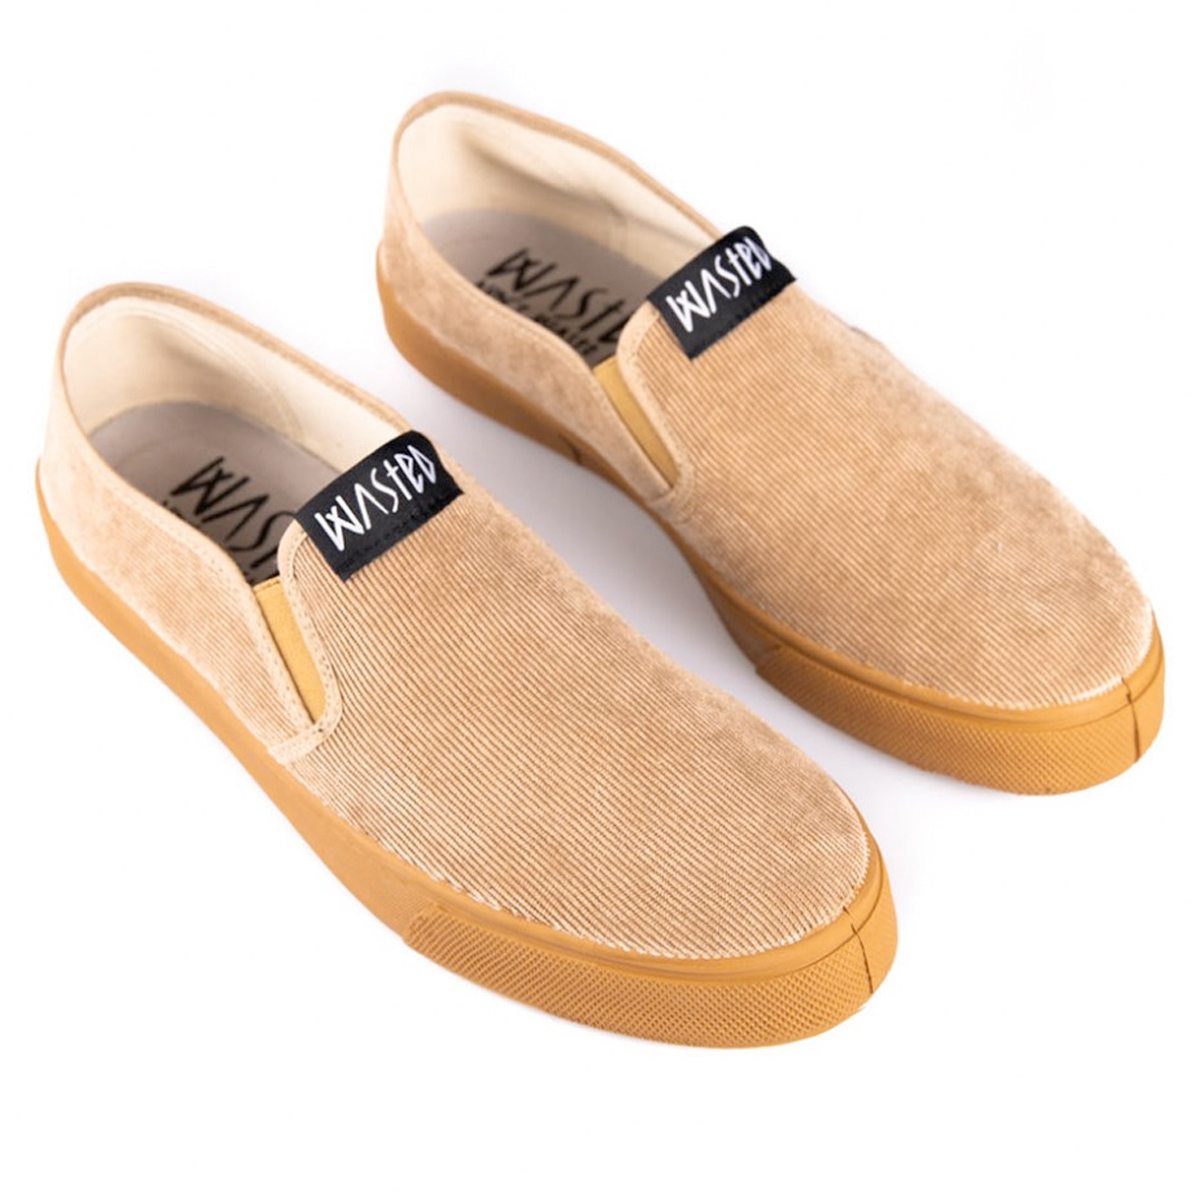 Wasted Schuhe Sliptight (cord brown gum)